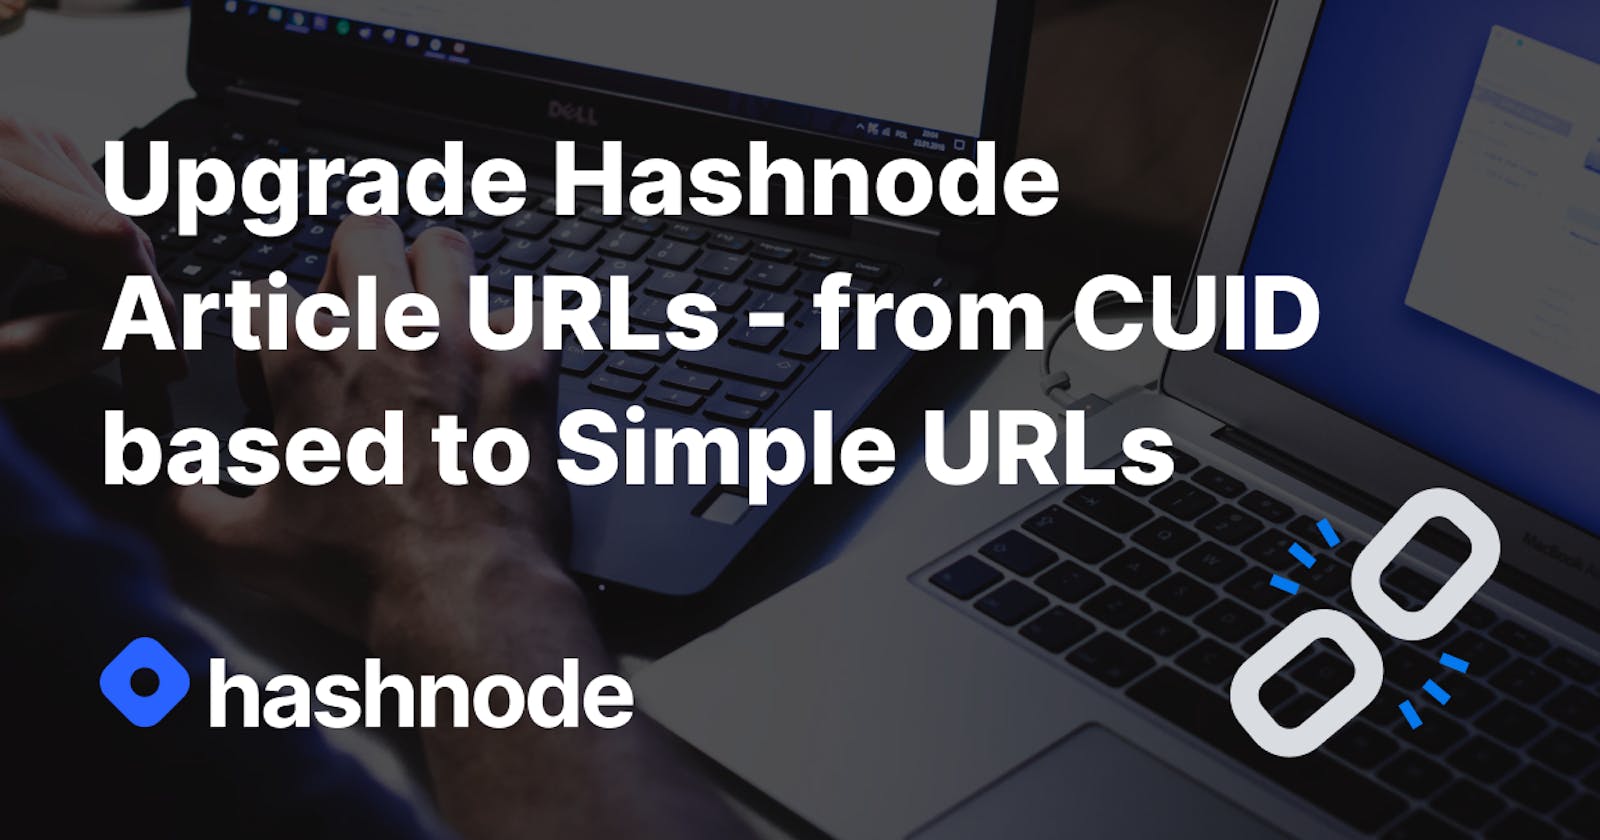 How to upgrade your Hashnode article URLs from CUID based to Simple URLs (non-CUID)?